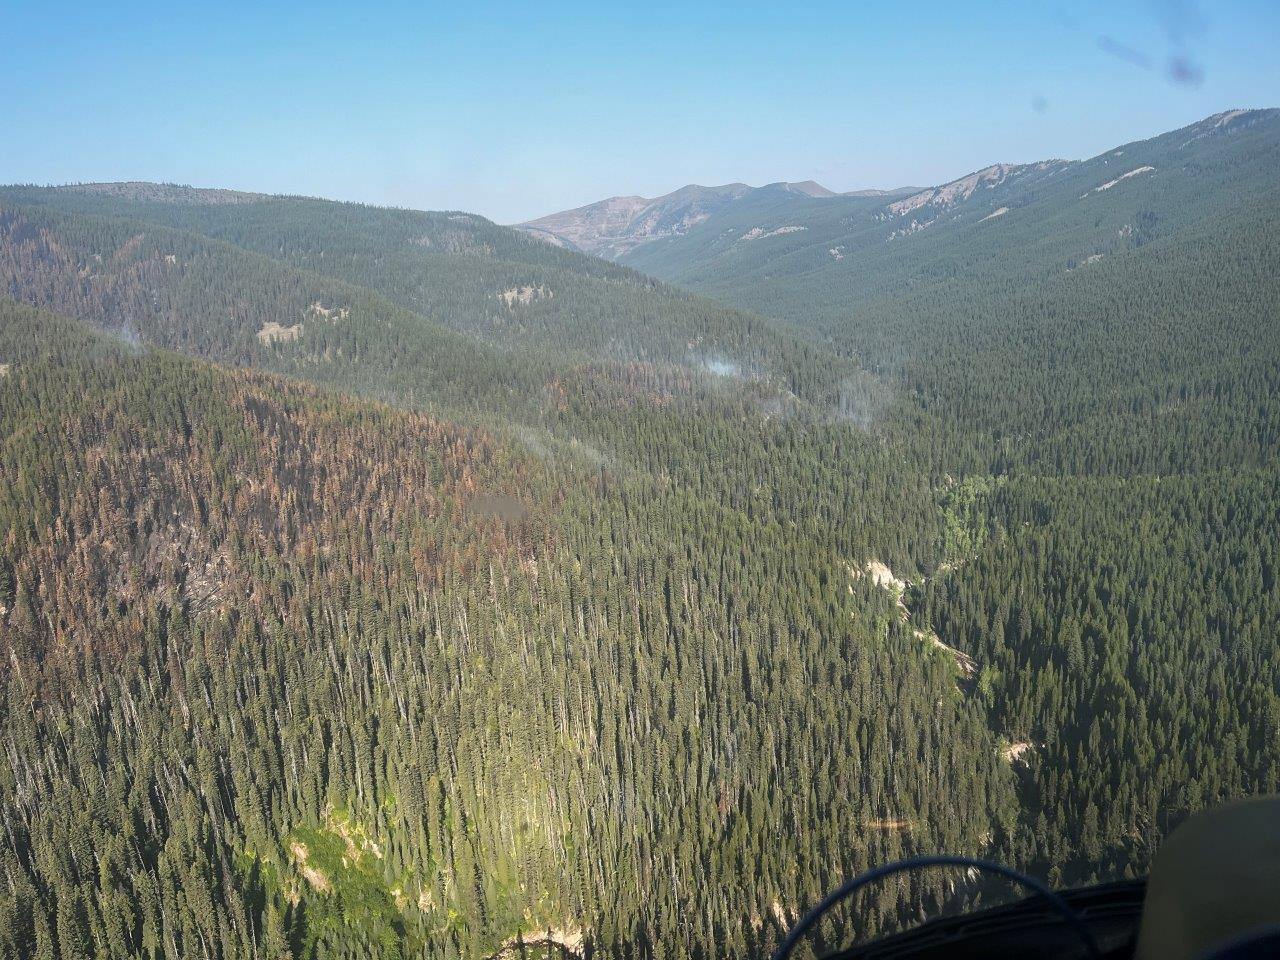 The Dean Creek Fire as seen looking north up the Dean Creek drainage on 9/8/2022